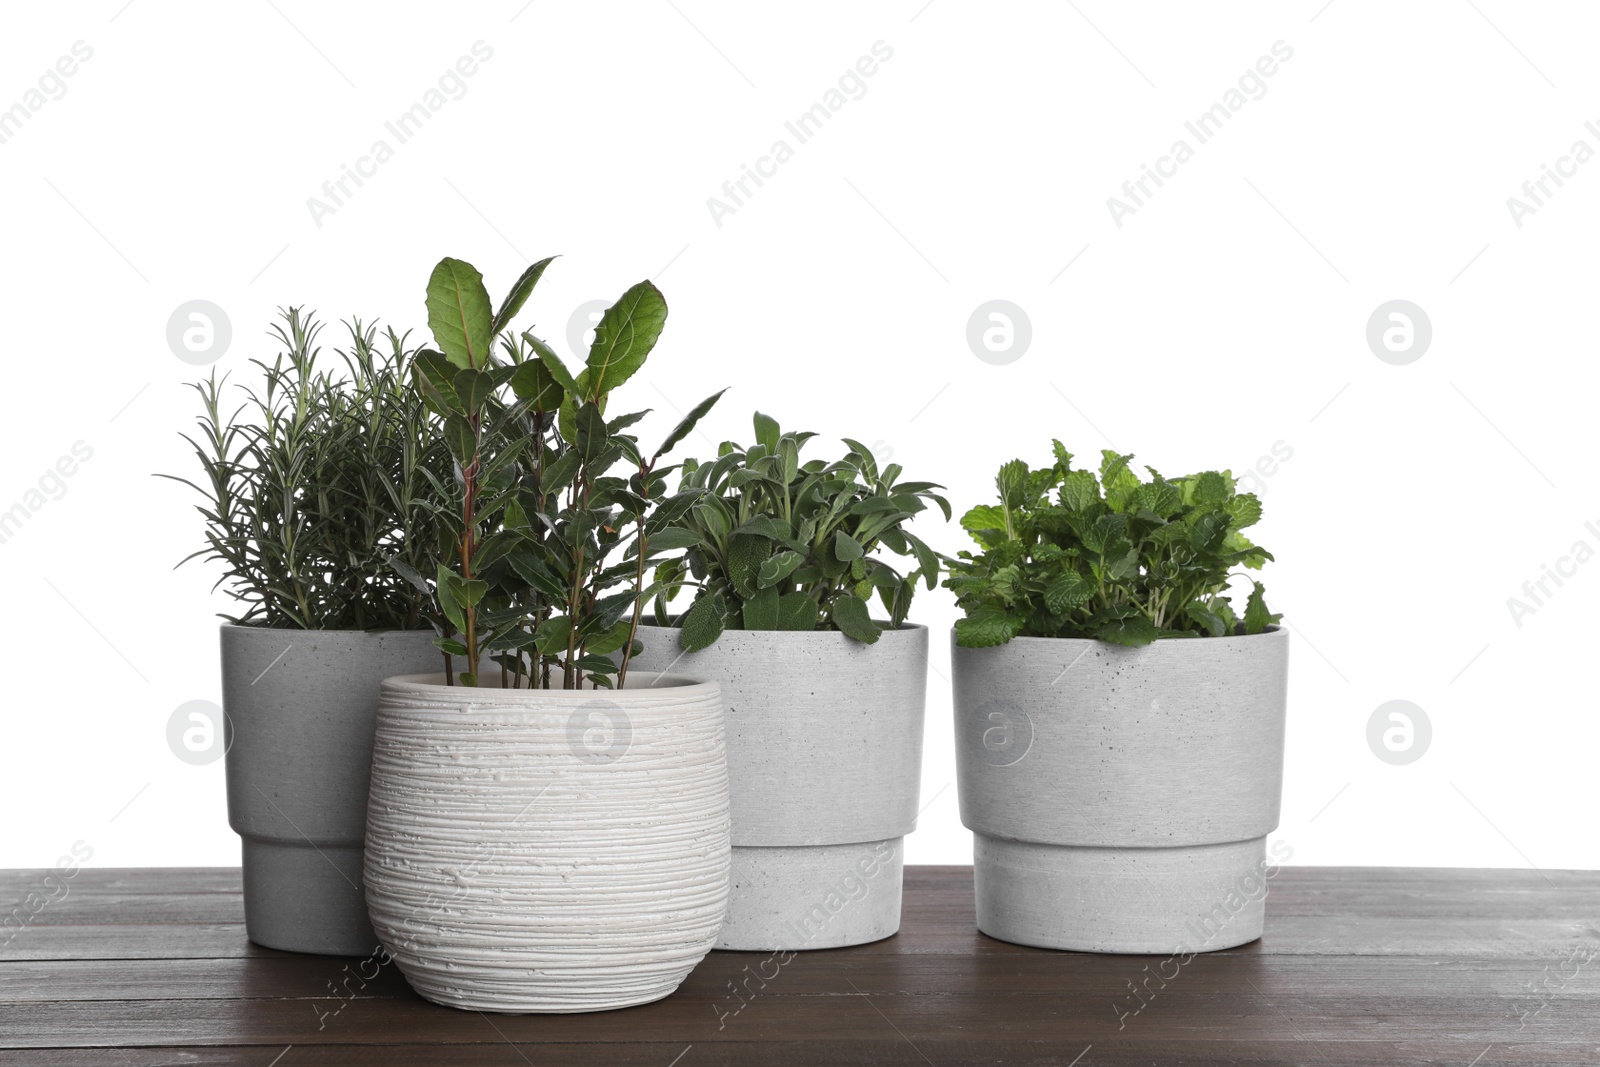 Photo of Pots with bay, sage, mint and rosemary on wooden table against white background